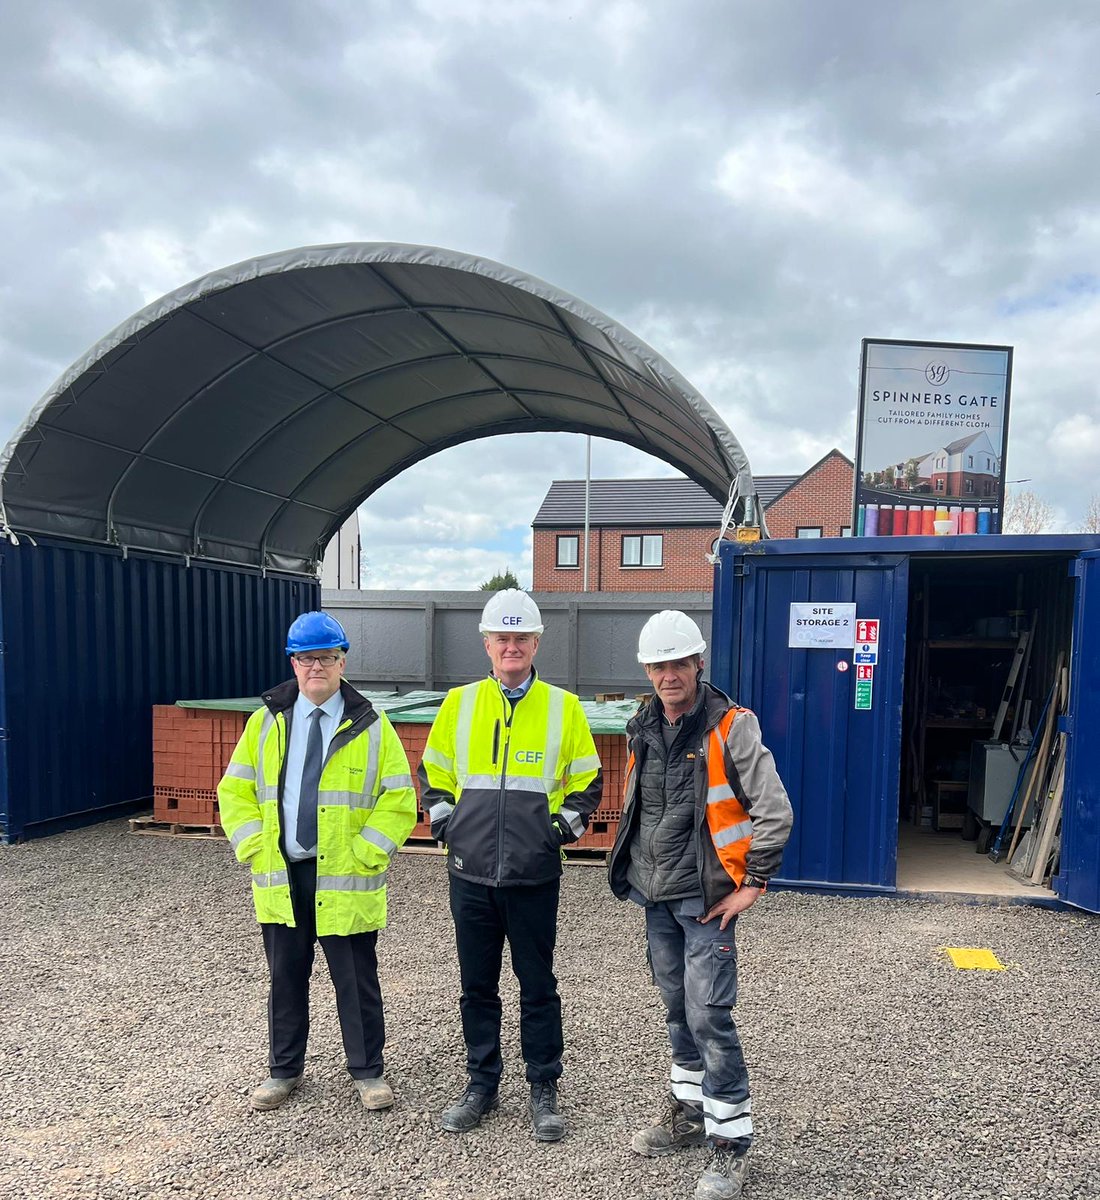 We were delighted to visit with Vaughan Engineering for a tour of their Spinners Gate development in Newtownabbey! Great to catch up with Bryan Vaughan for a look around this impressive site and hear such passion about the job from Site Manager, Ricky Morrow. 👷👏